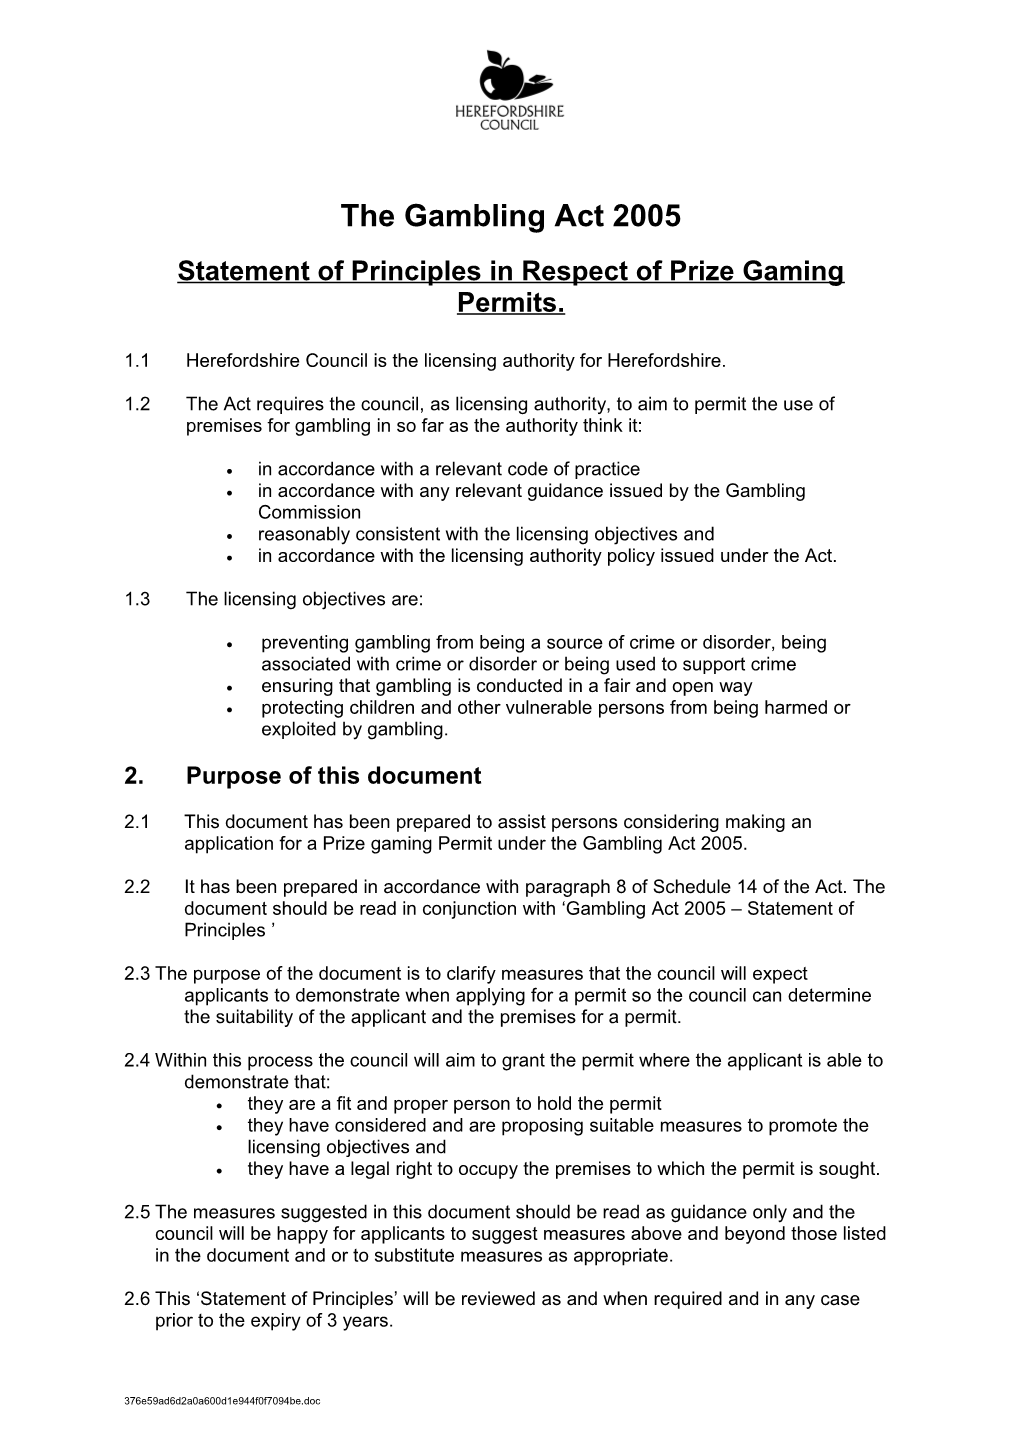 Statement of Principles Prize Gaming Permits